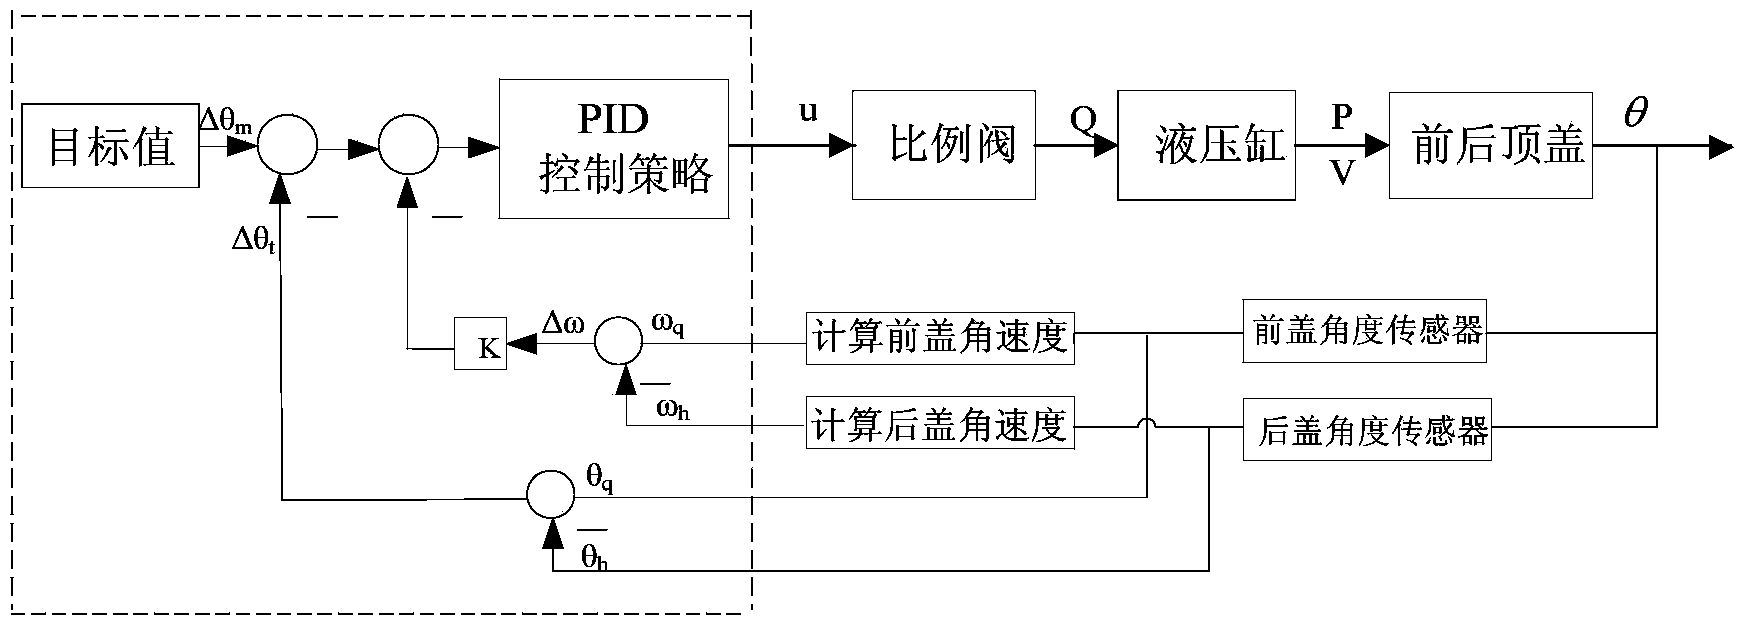 Single-side fast opening and closing control system of large double-top-cover mechanism of launching platform